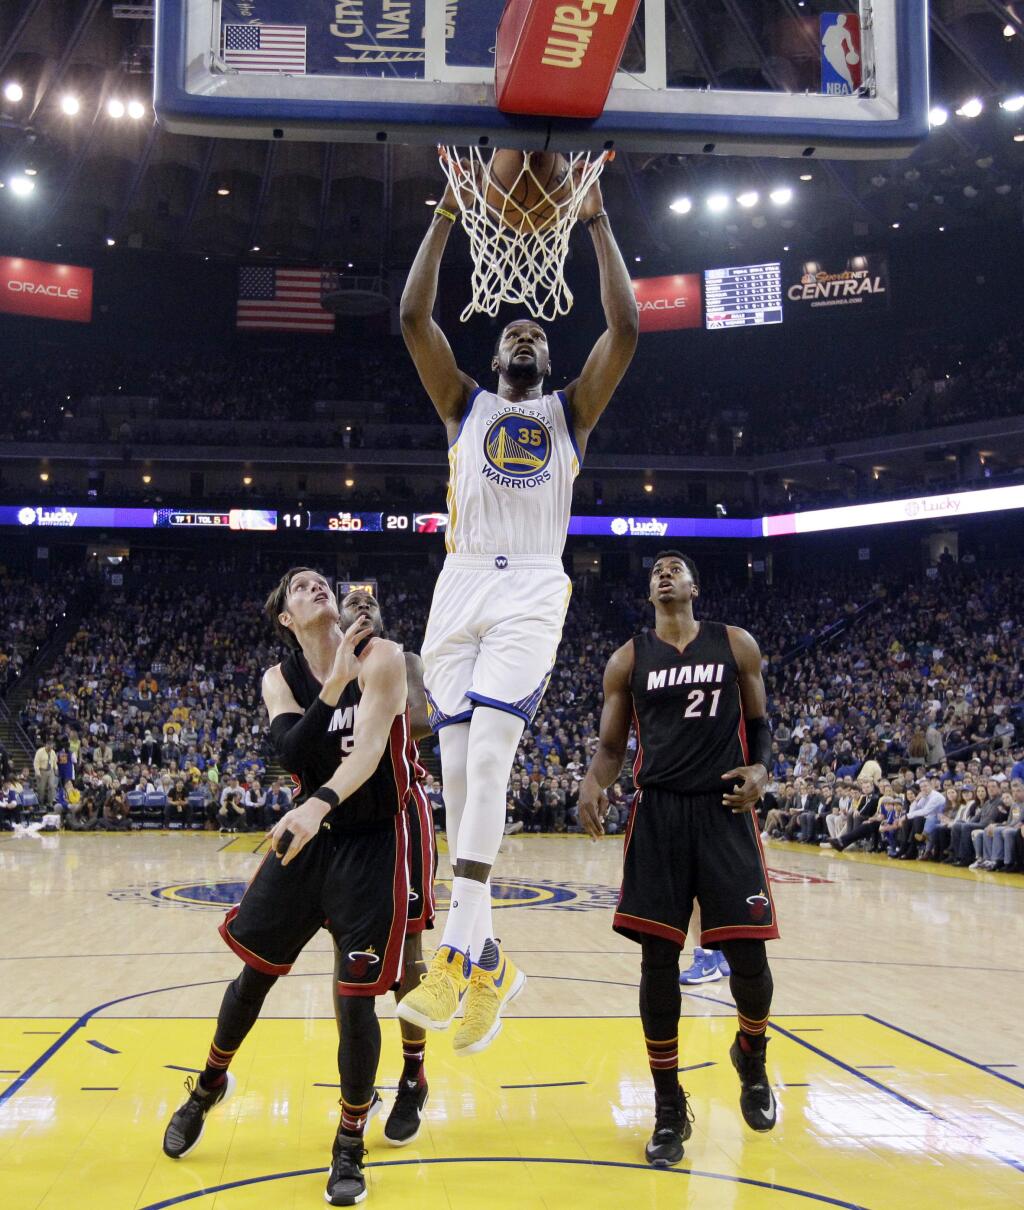 Golden State Warriors' Kevin Durant (35) dunks past Miami Heat's Luke Babbitt, left, and Hassan Whiteside (21) during the first half of an NBA basketball game Tuesday, Jan. 10, 2017, in Oakland, Calif. (AP Photo/Marcio Jose Sanchez)